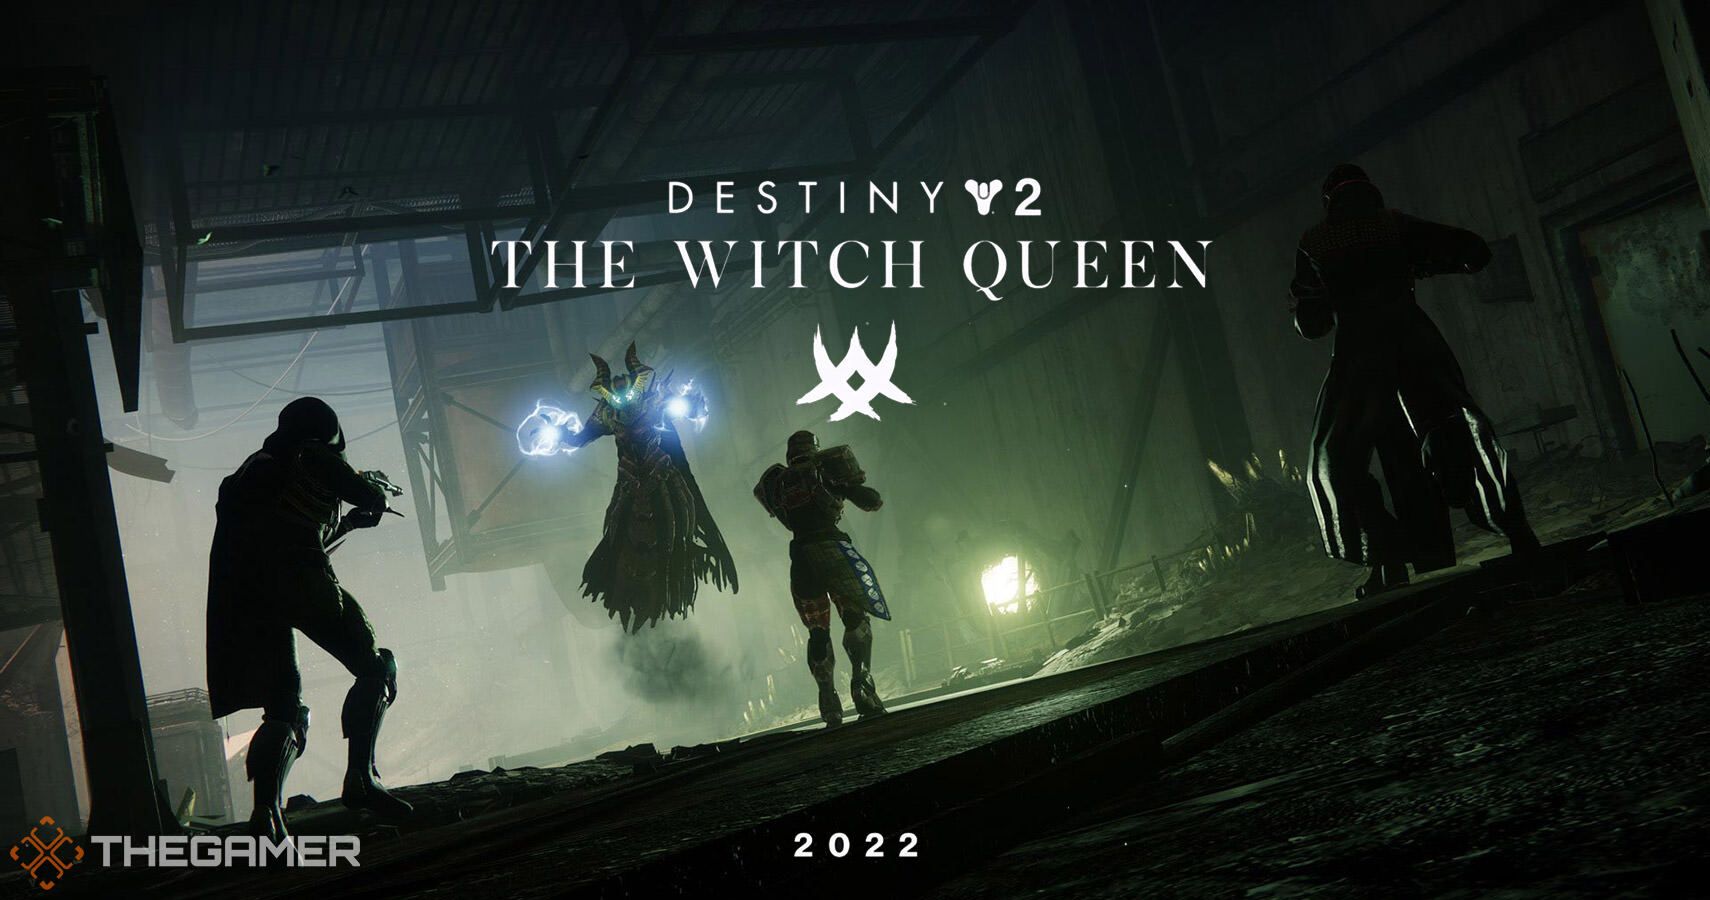 Destiny 2 The Witch Queen - Delayed 2022 Release